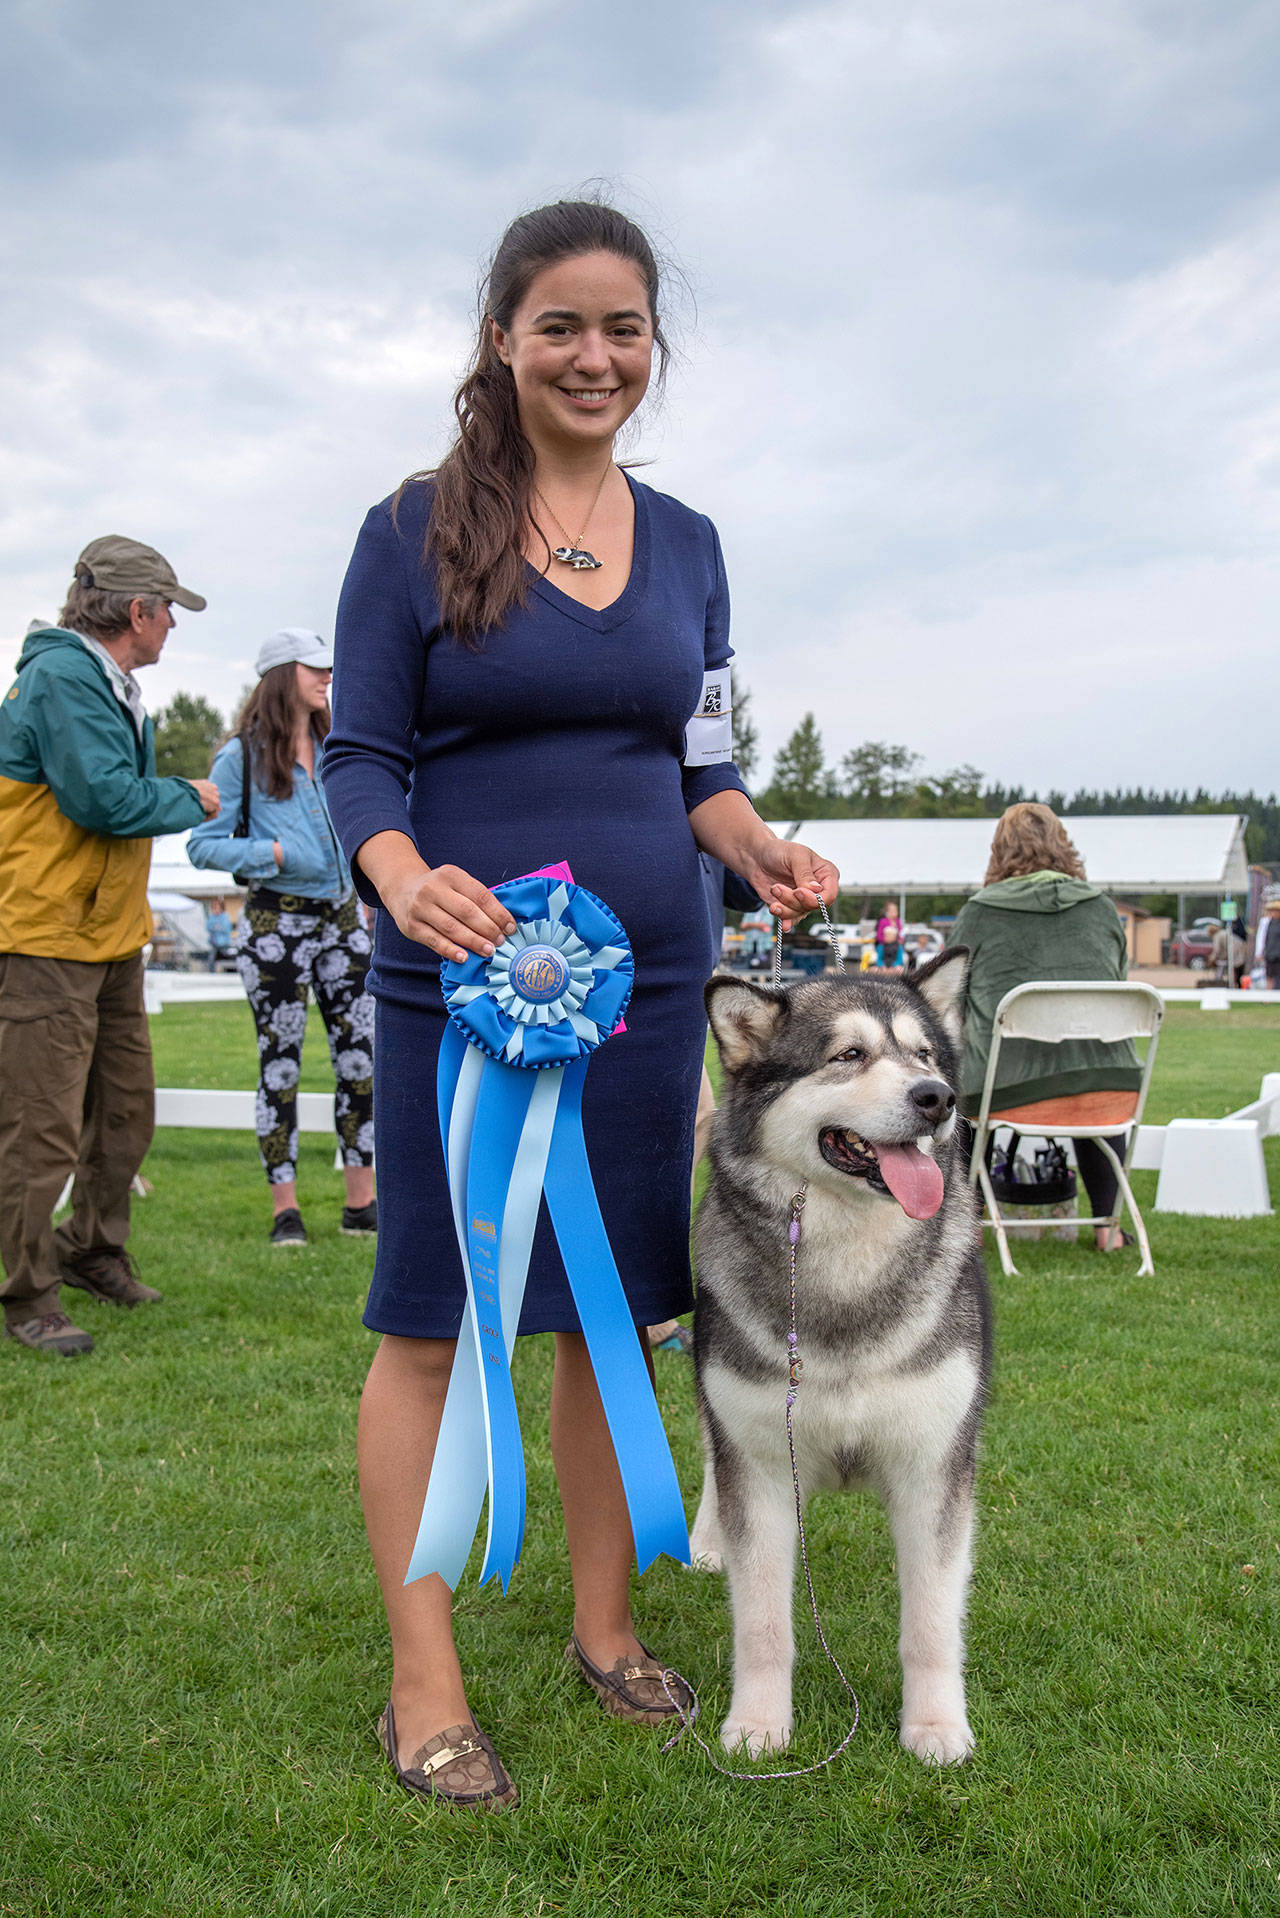 Julie Despot’s dog, Dolly, won the blue ribbon in the working dog group on day two of Hurricane Ridge Kennel Club’s “All Breeds Dog Show” on July 31 at Carrie Blake Community Park in Sequim. Each day, dogs who win “best of breed” go on to compete with dogs categorized by the type of activity for which they are bred, called a group, of which their are seven. Dogs are judged by their appearance and poise. Dolly went on to compete in the “Best of Show” at the end of the day. (Emily Matthiessen/Olympic Peninsula News Group)